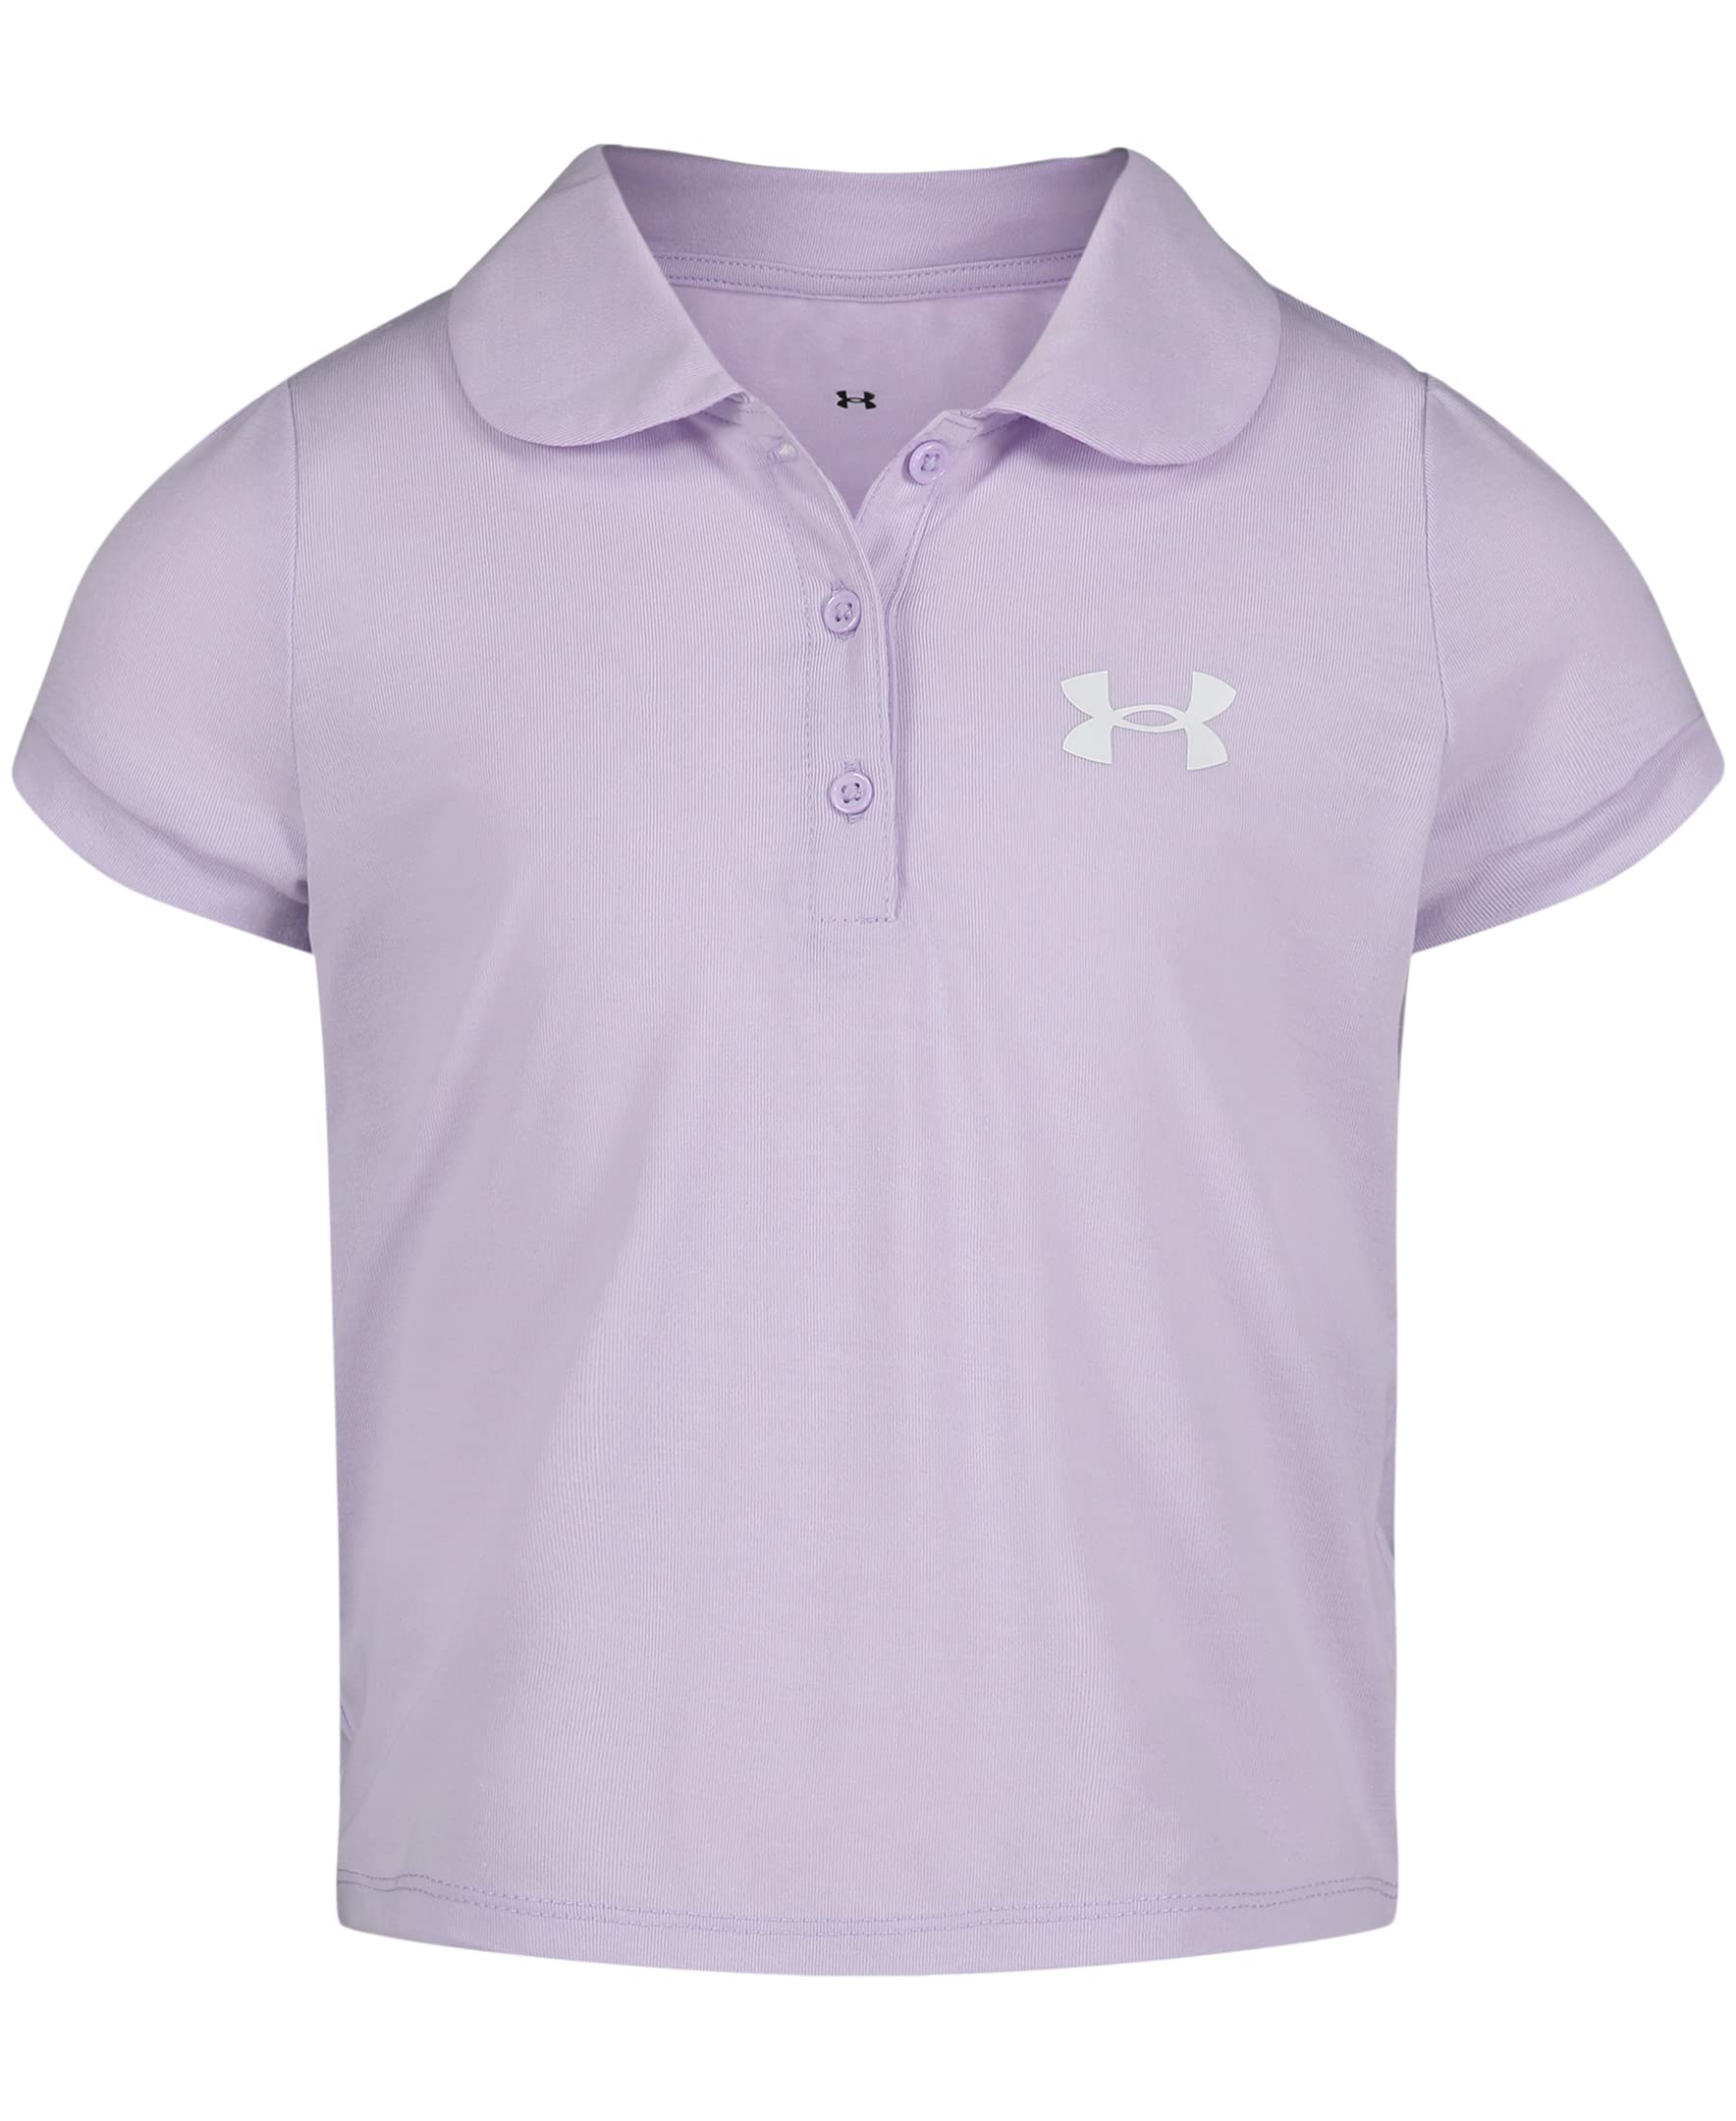 Under Armour Girls' Short Sleeve Polo Collared Shirt, Chest Logo, Soft & Comfortable